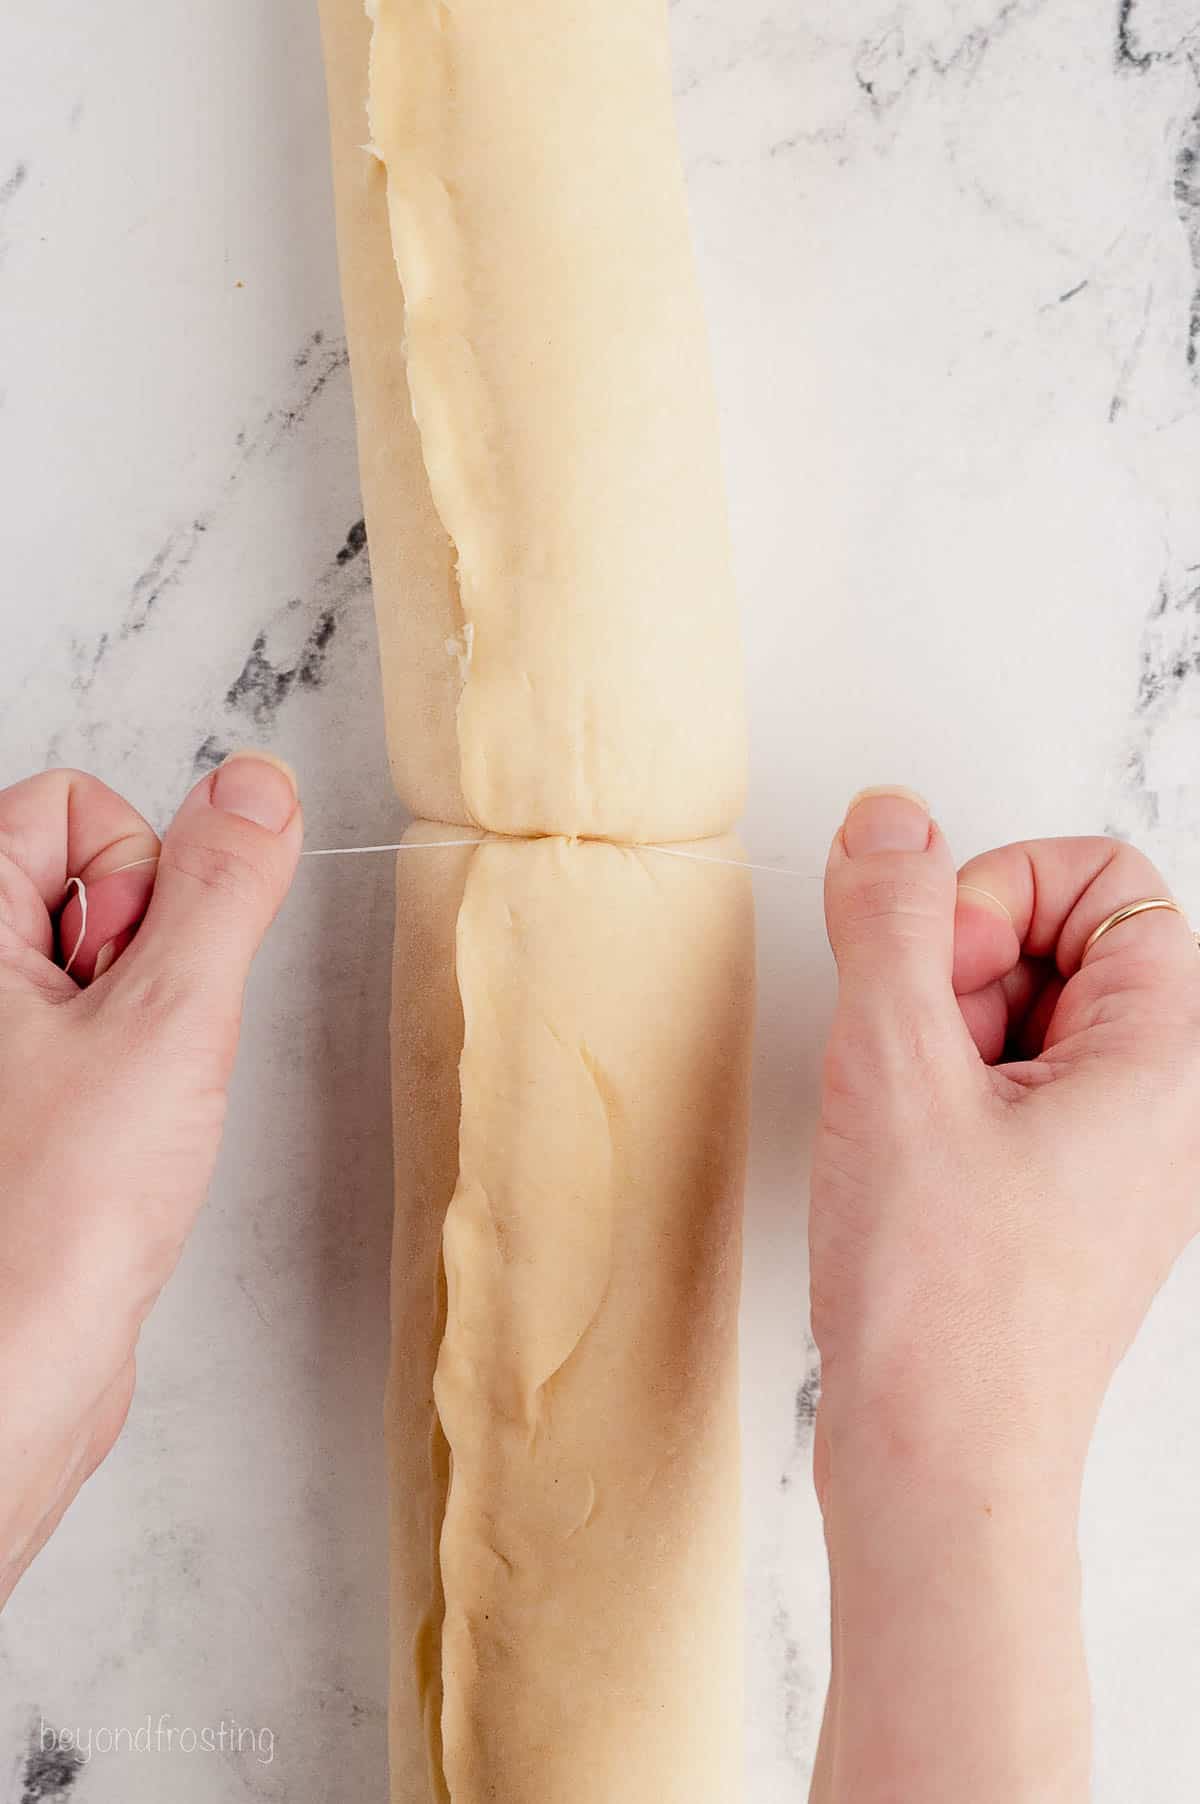 Two hands use floss to cut a log of cinnamon roll dough into rolls.